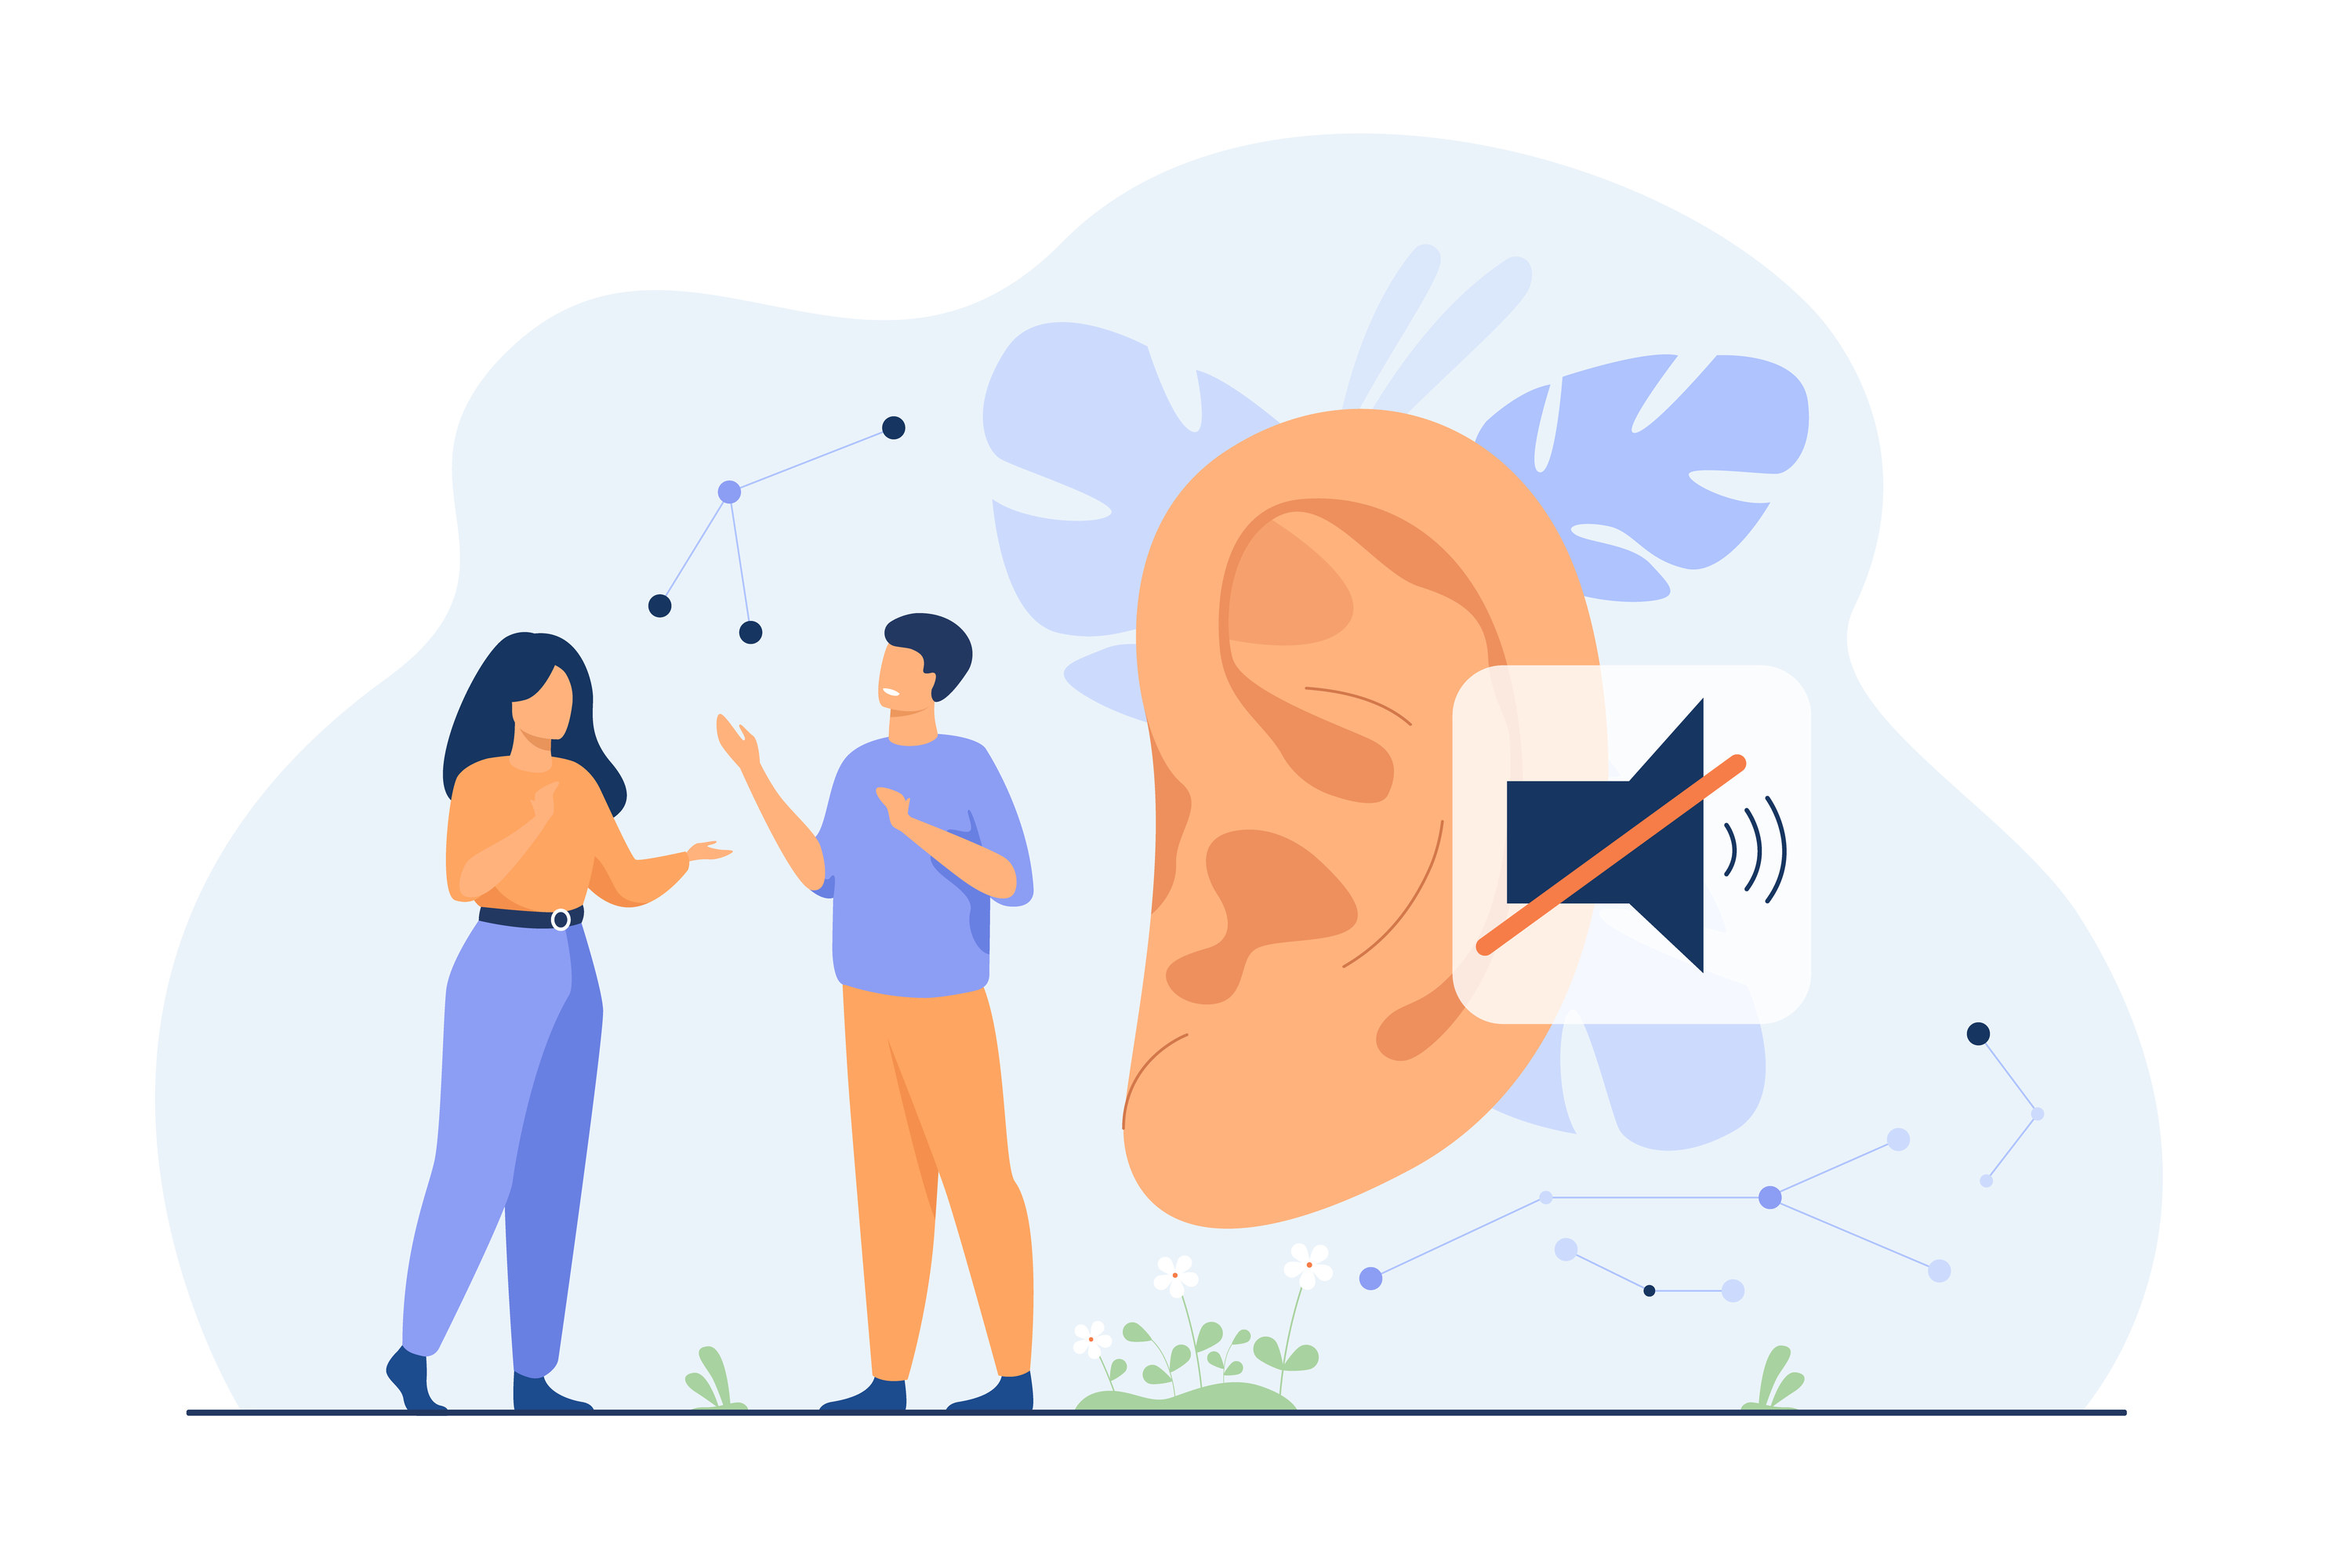 An illustration of two people talking to each other with an ear next to them and the symbol for the audio button on mute